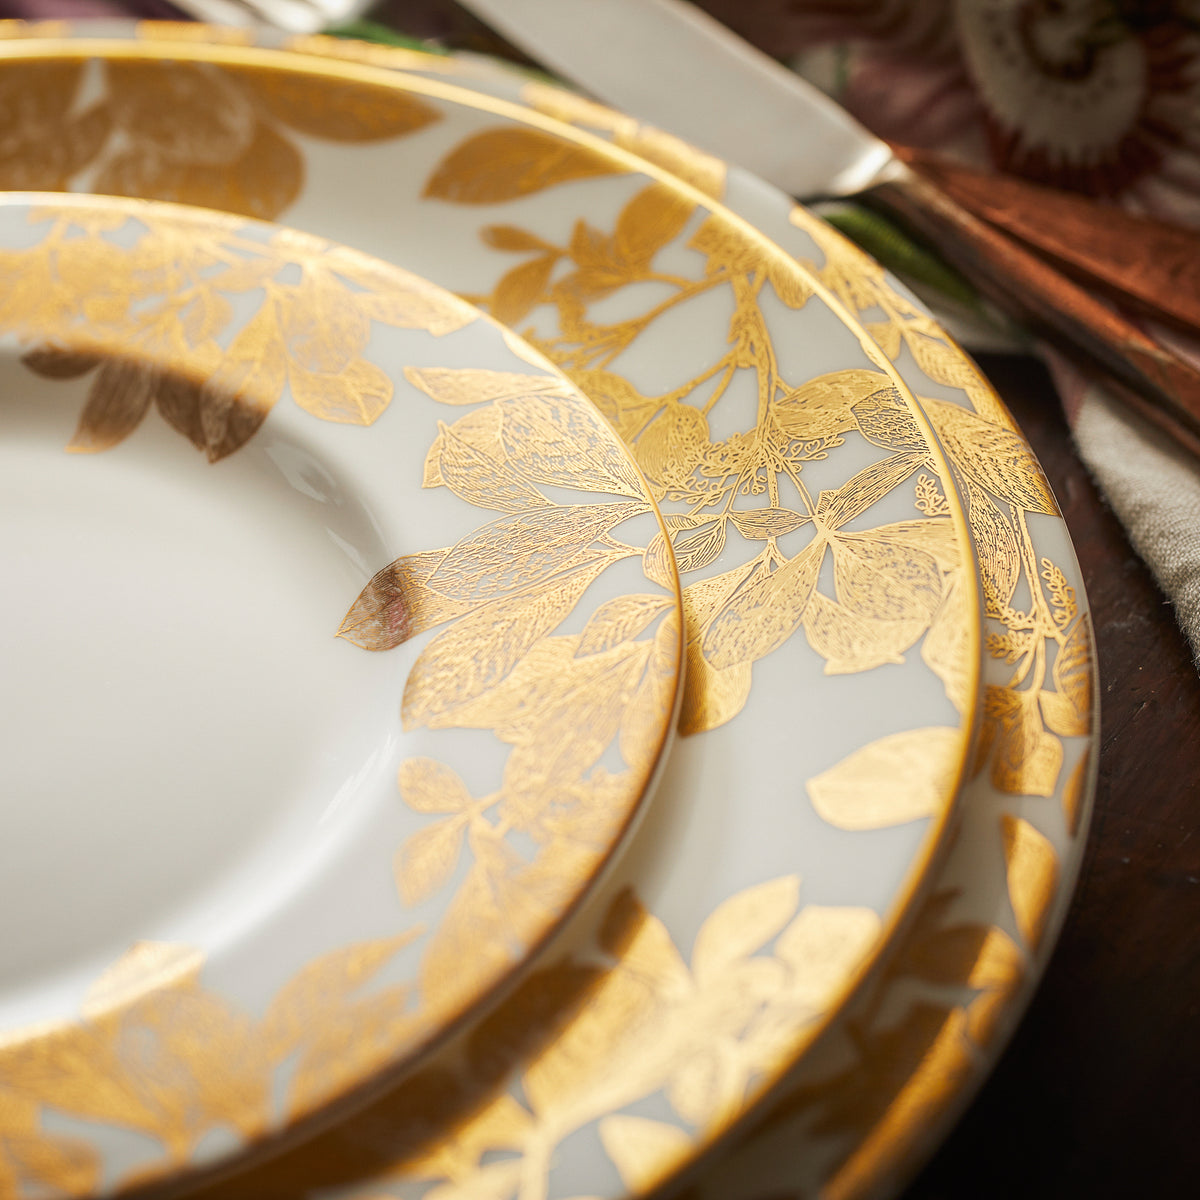 A set of Arbor Gold Rimmed Dinner Plates, created by Caskata Artisanal Home, with gold leaf designs on them.